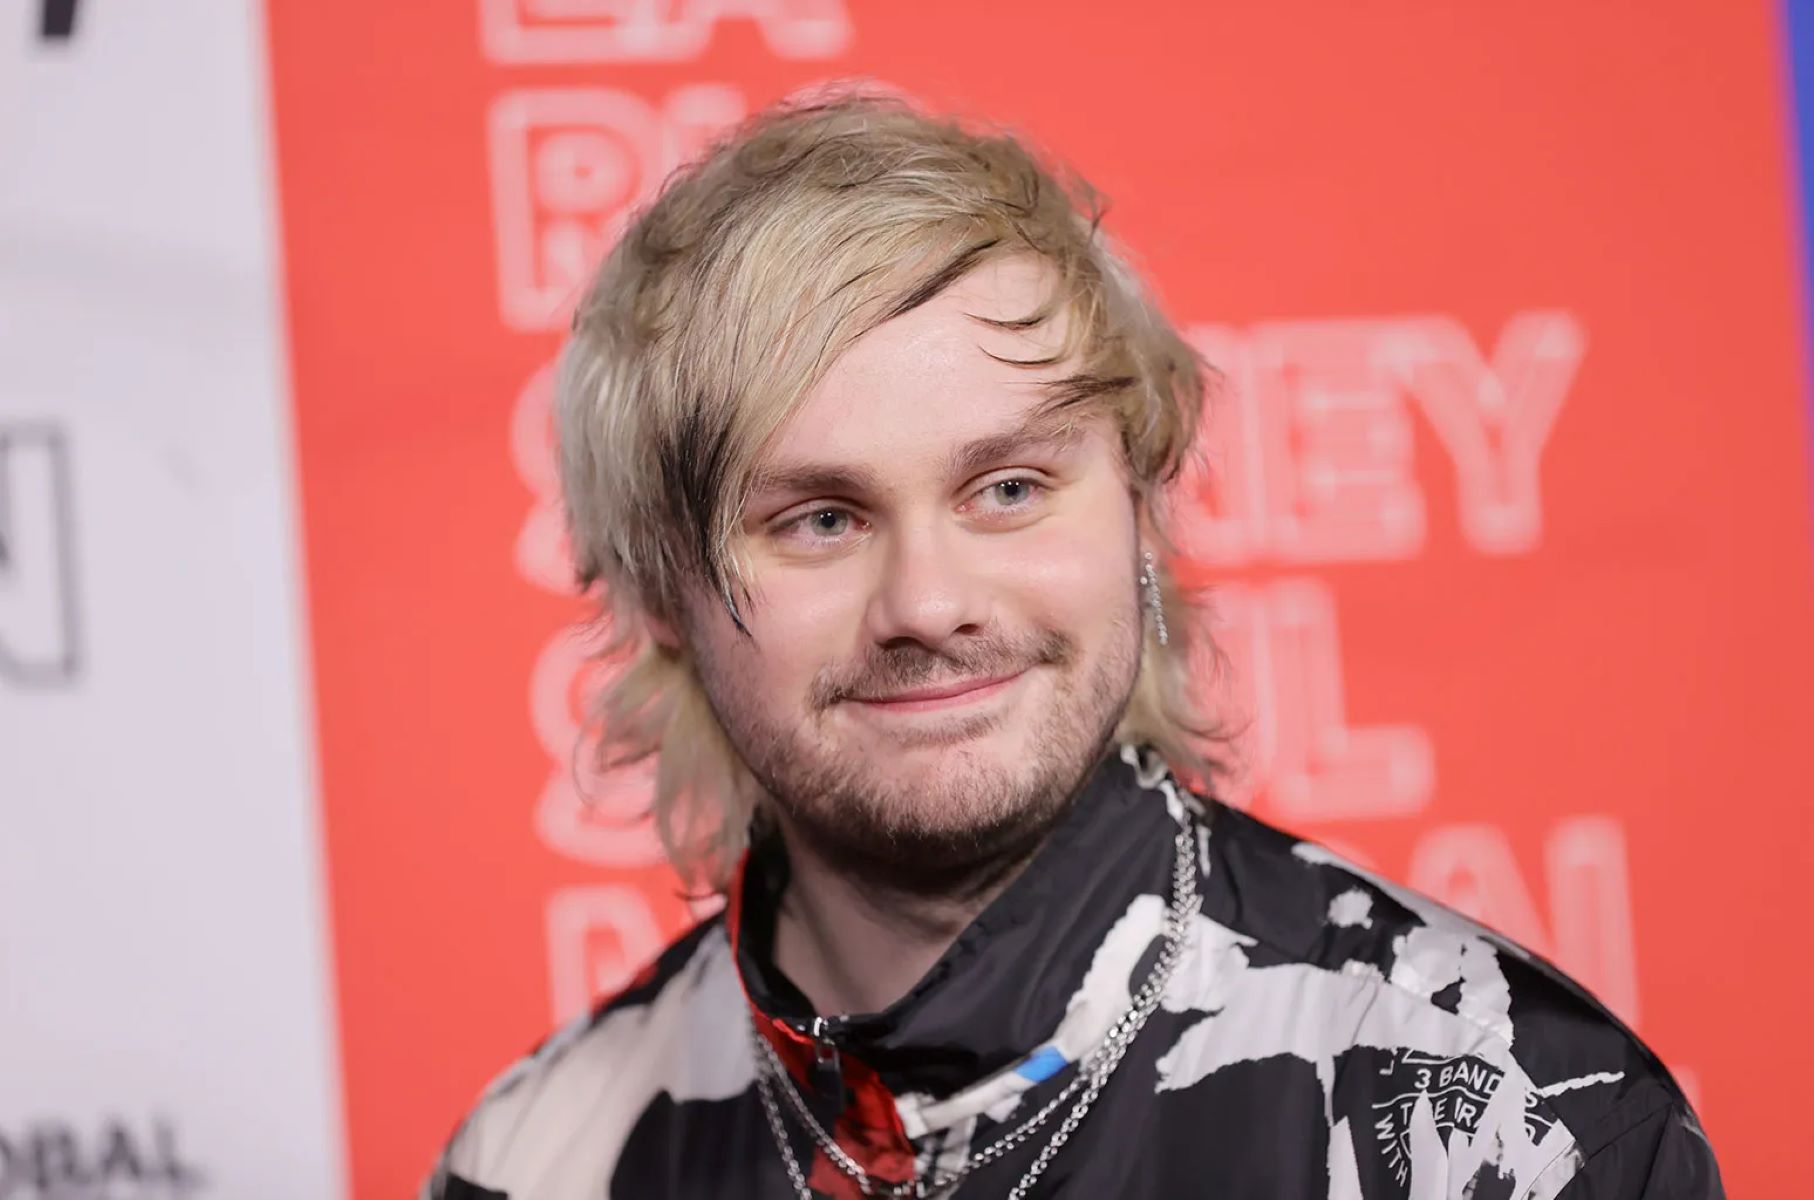 15 Captivating Facts About Michael Clifford - Facts.net